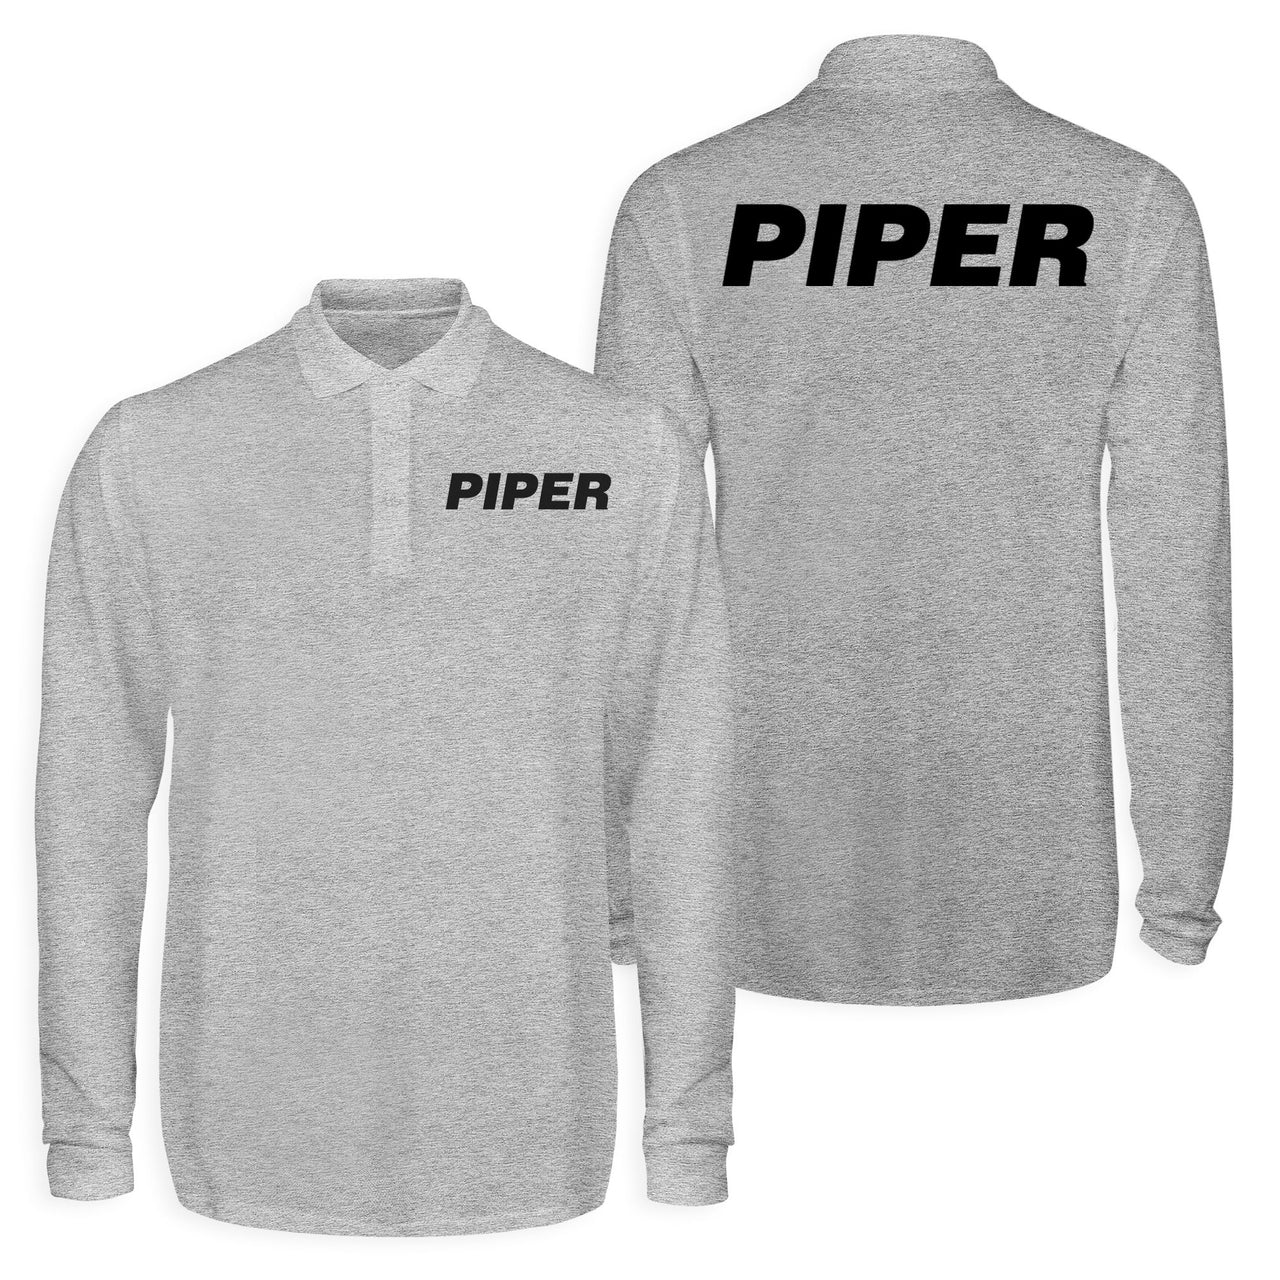 Piper & Text Designed Long Sleeve Polo T-Shirts (Double-Side)